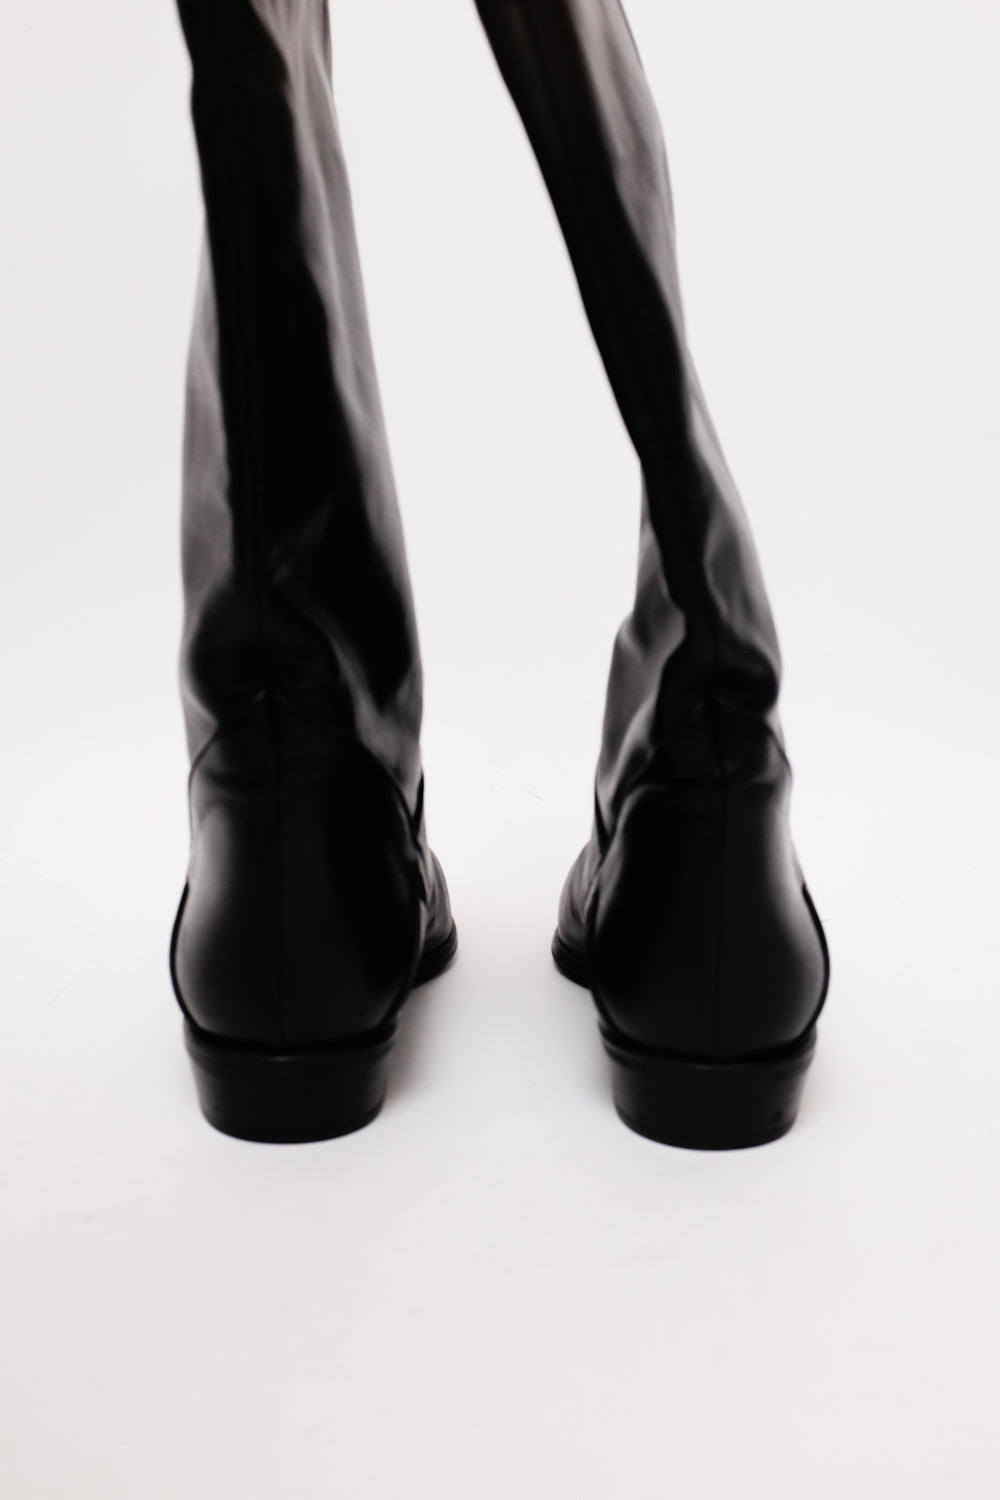 BLACK ITALY LEATHER BOOTS 39